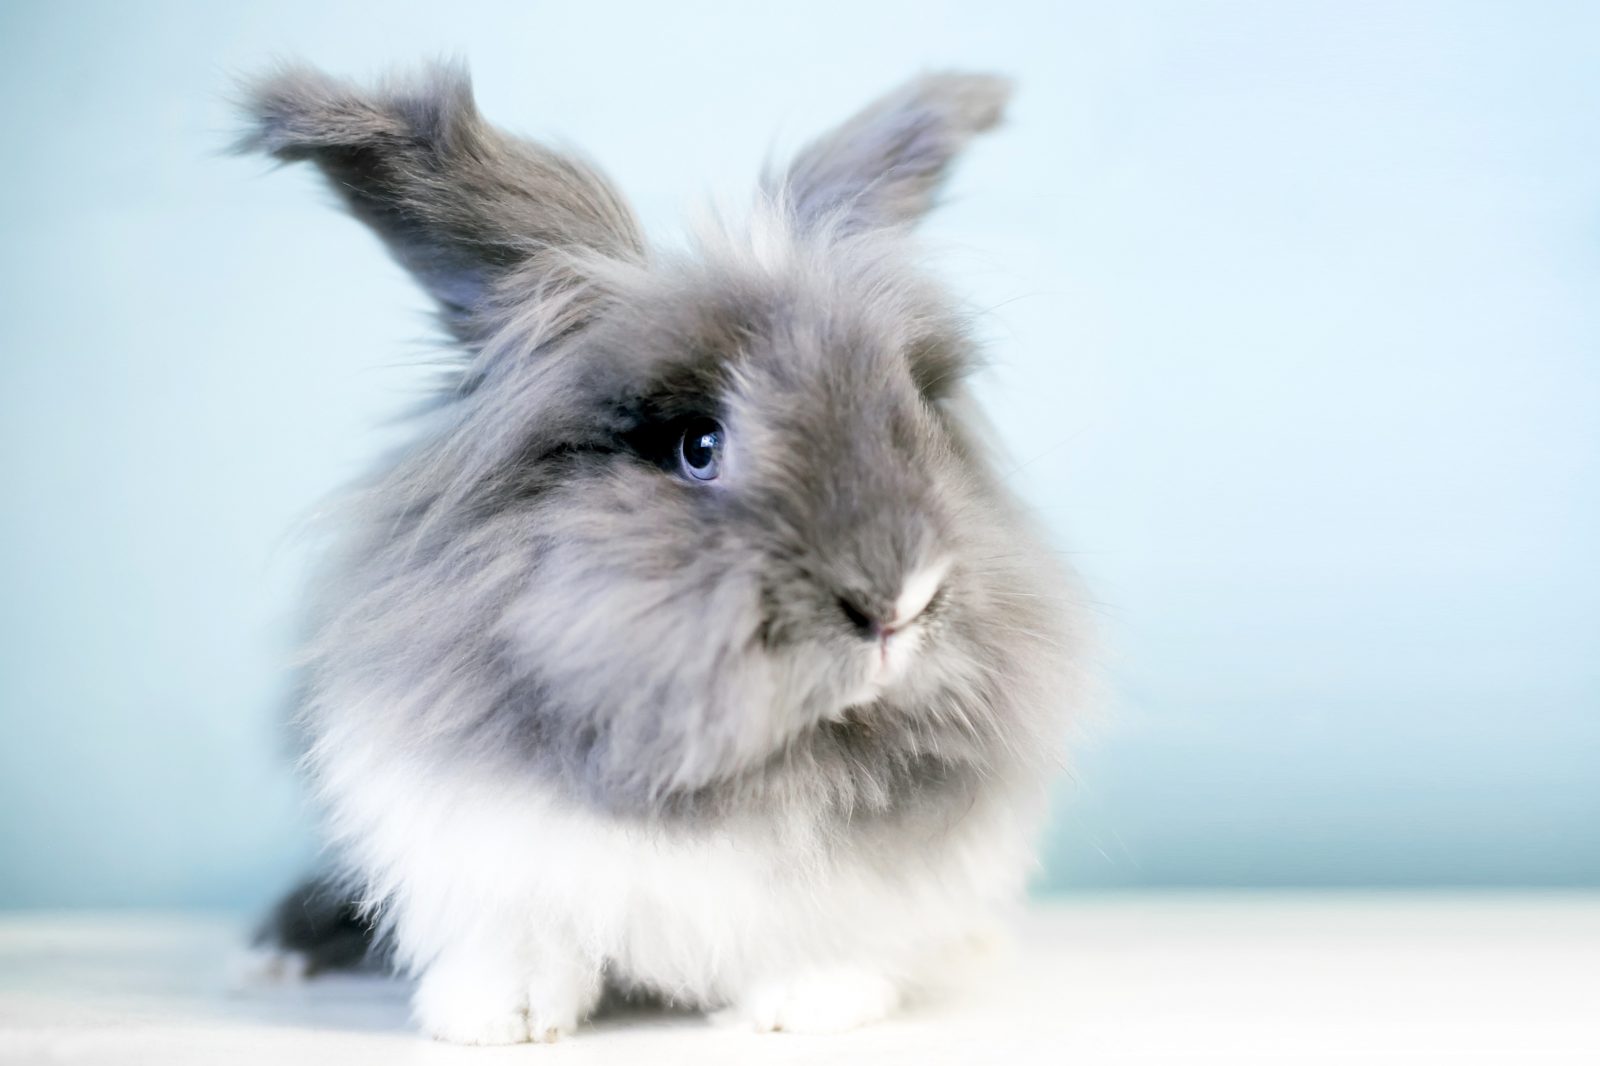 This Animal Quiz Might Not Be Hardest 1 You've Ever Taken, But It Certainly Isn't Easy Lionhead rabbit